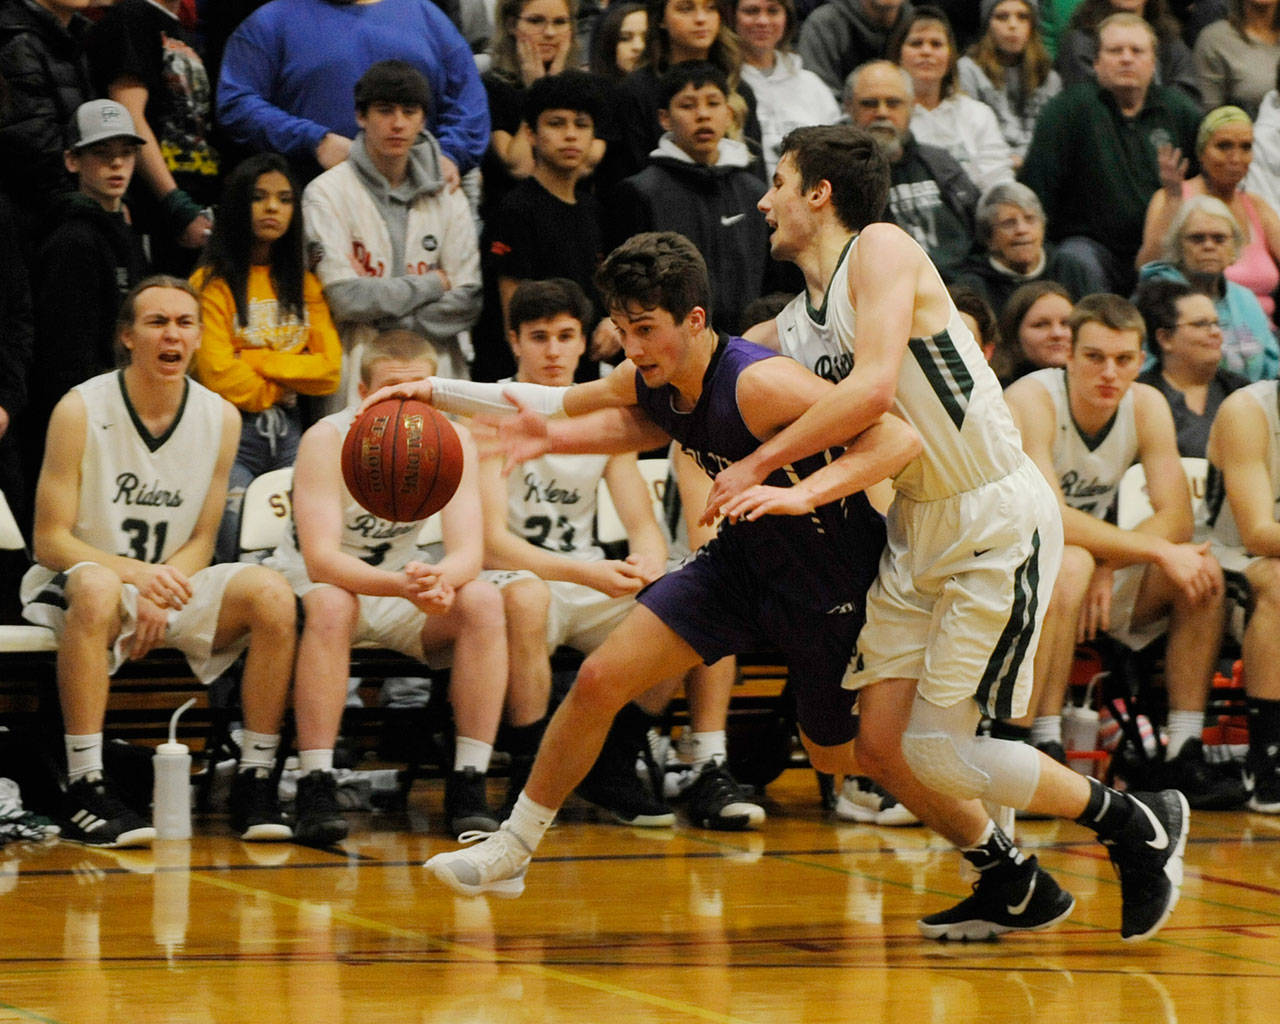 Boys basketball: Roughriders end Wolves’ season with 10-point win in district match-up